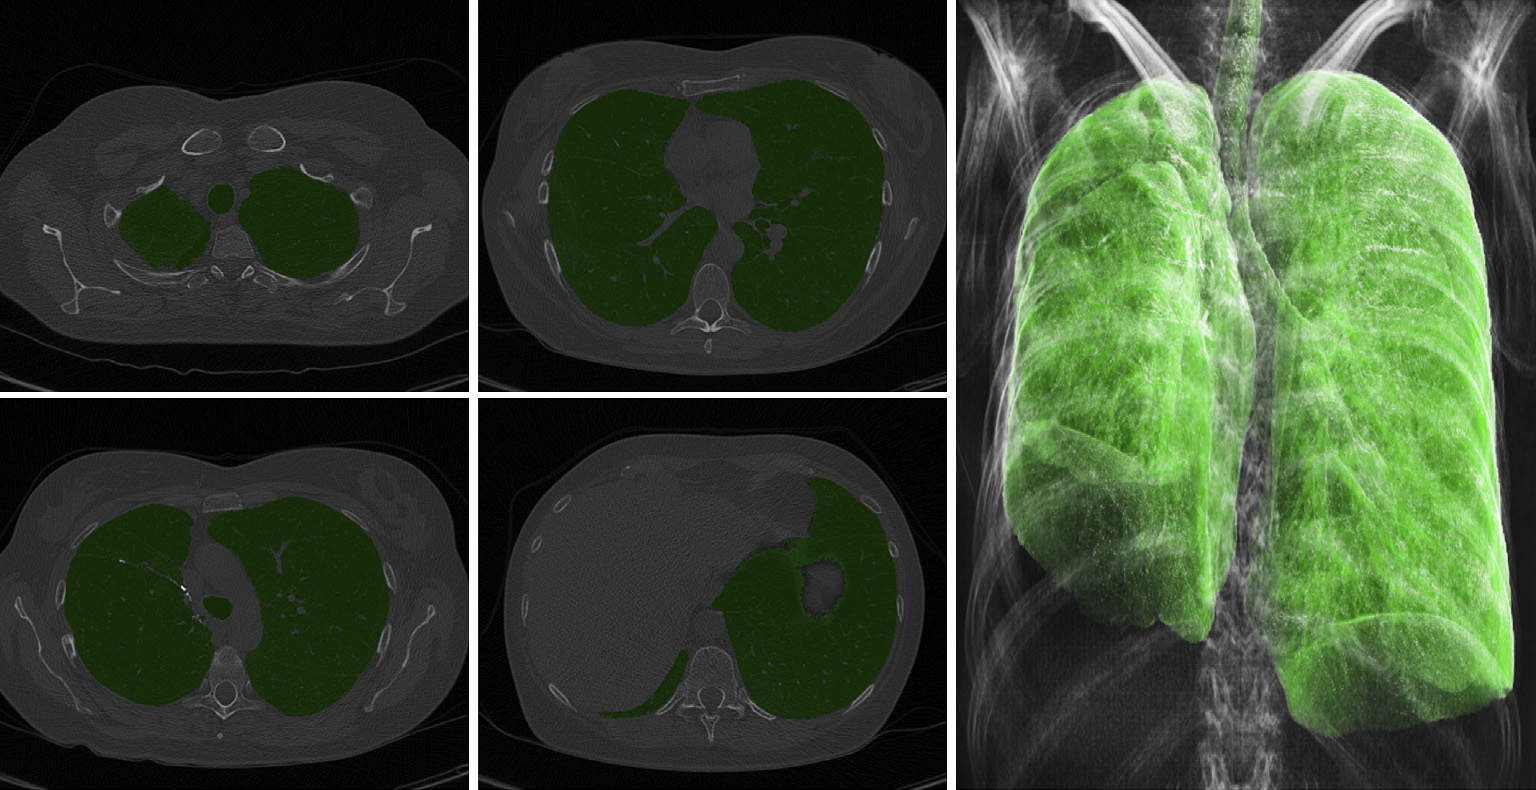 The image contains overlays in lung window settings to check the plausibility of automatically measuring the lung. The axial images (lung window with overlay) and 3D reconstruction show perfect identification of lung parenchyma in a patient after lobectomy.